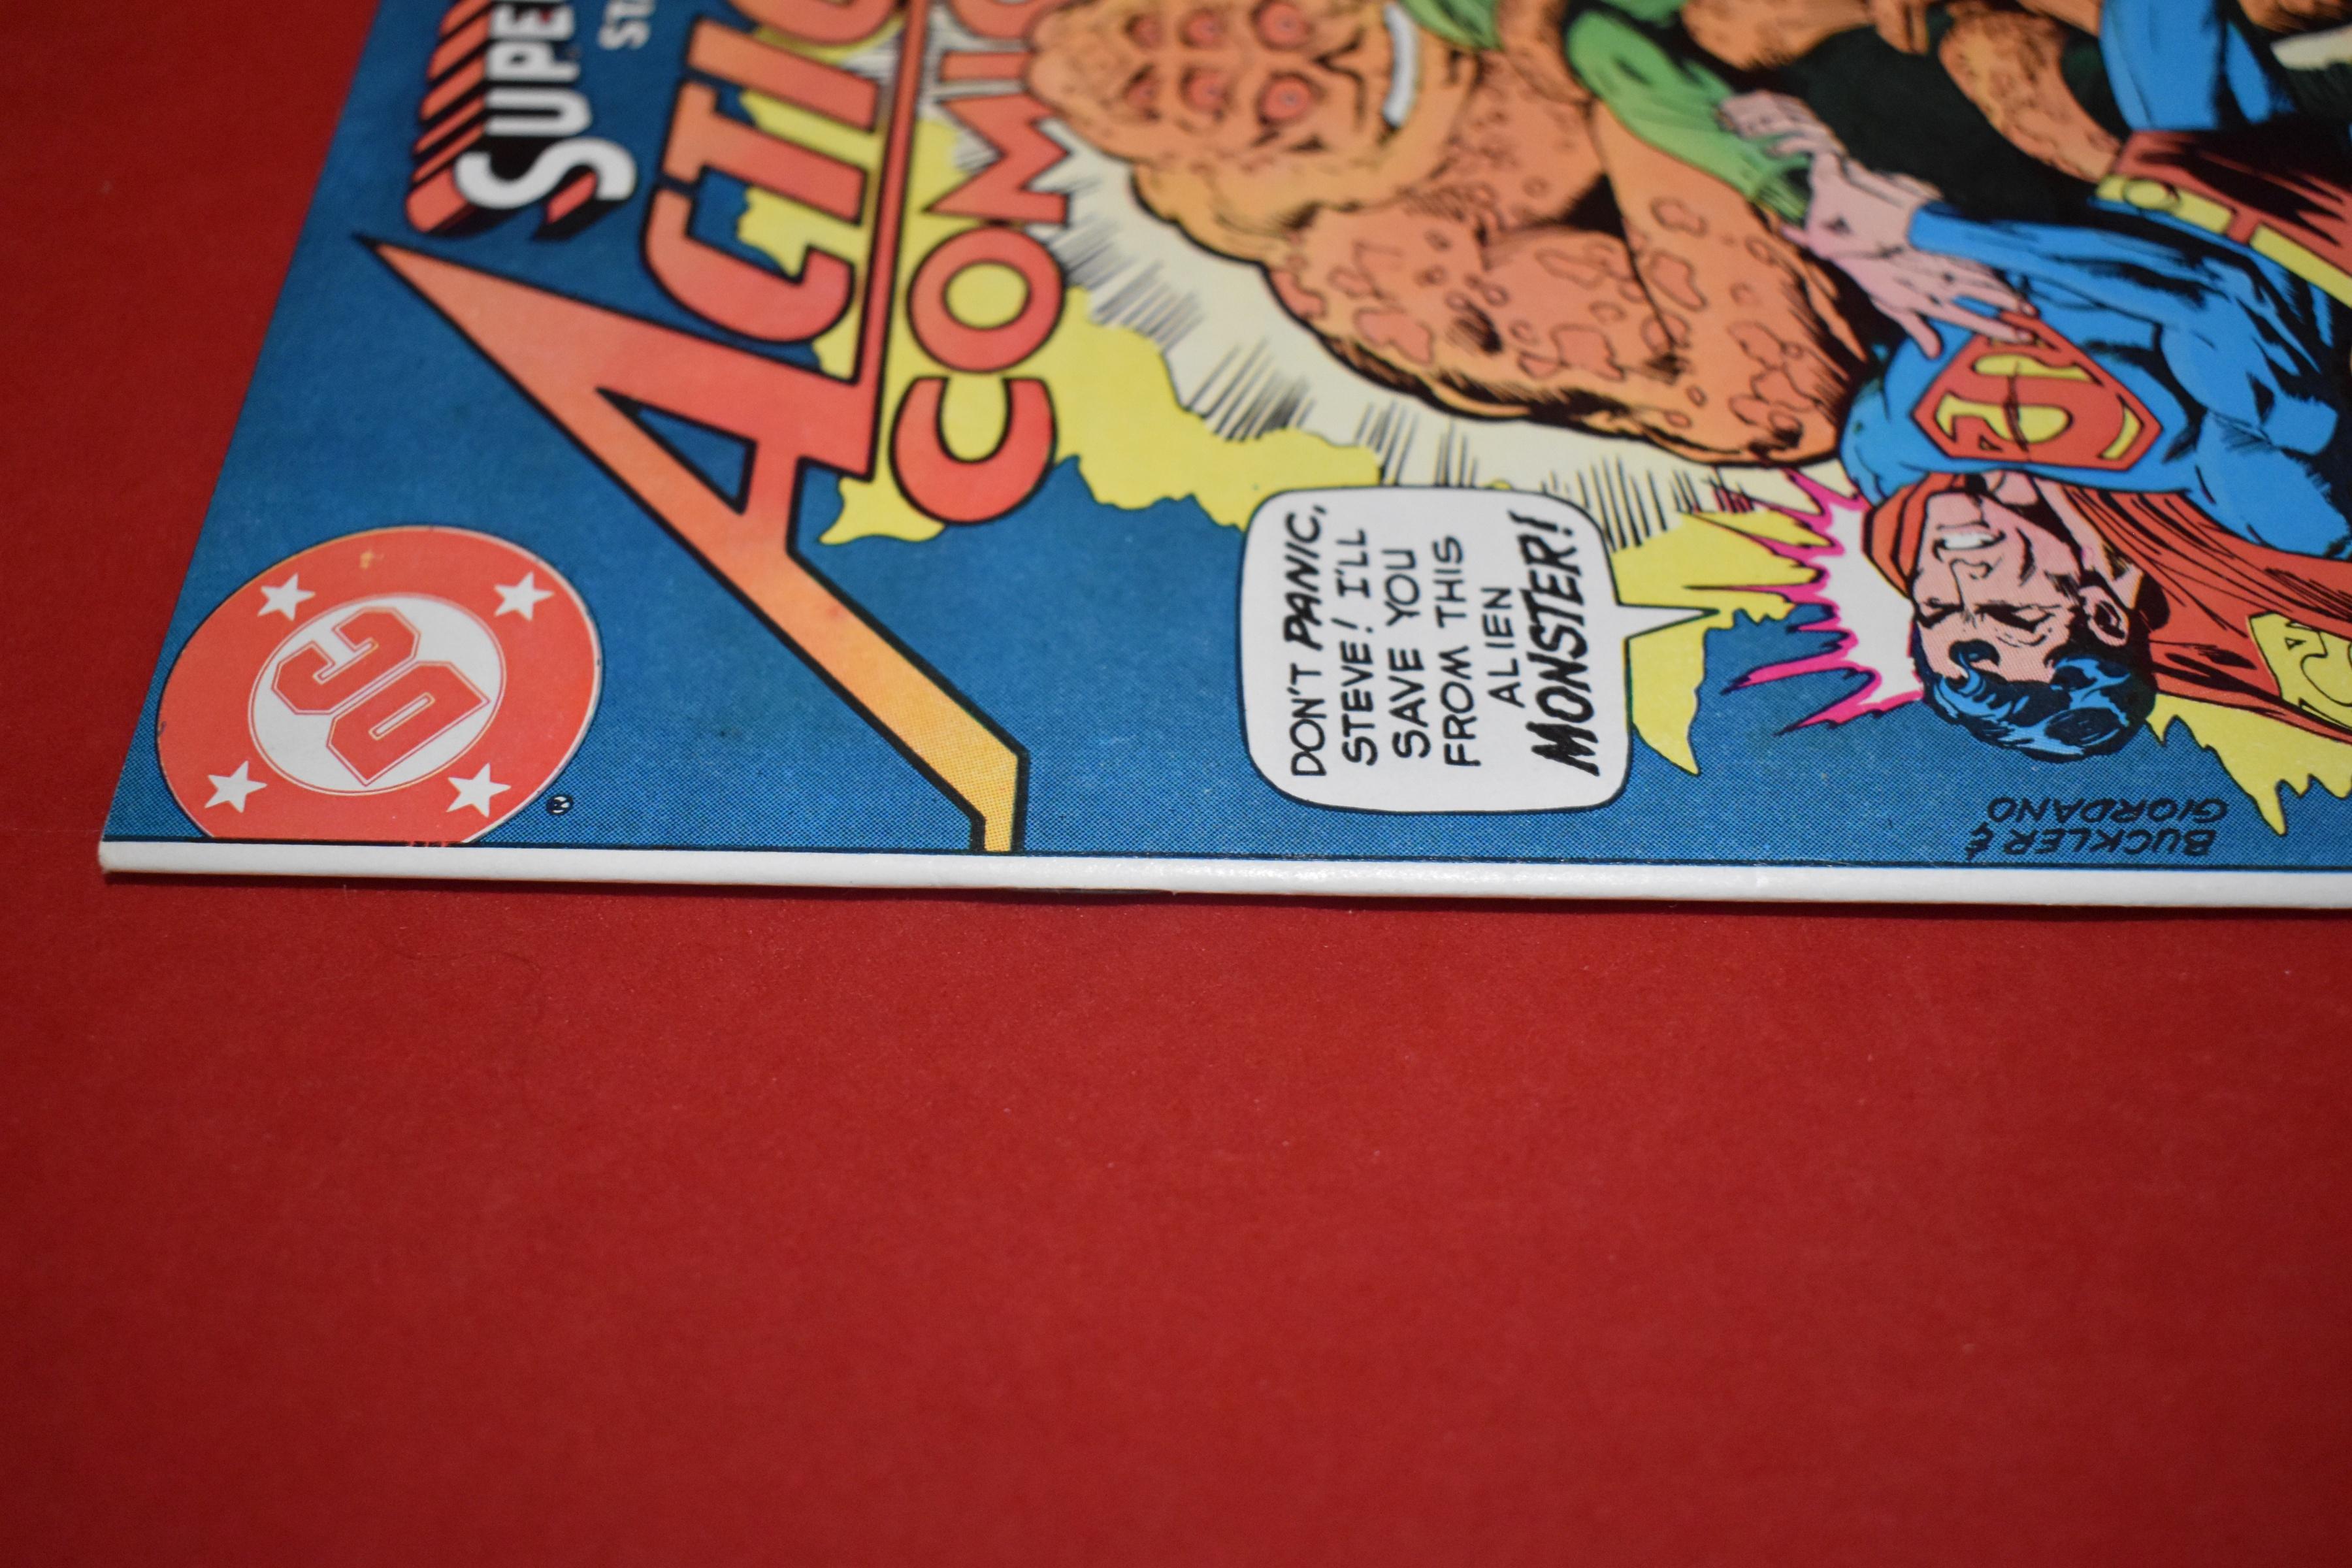 ACTION COMICS #523 | THE EYE OF THE STORM - RICH BUCKLER - 1981